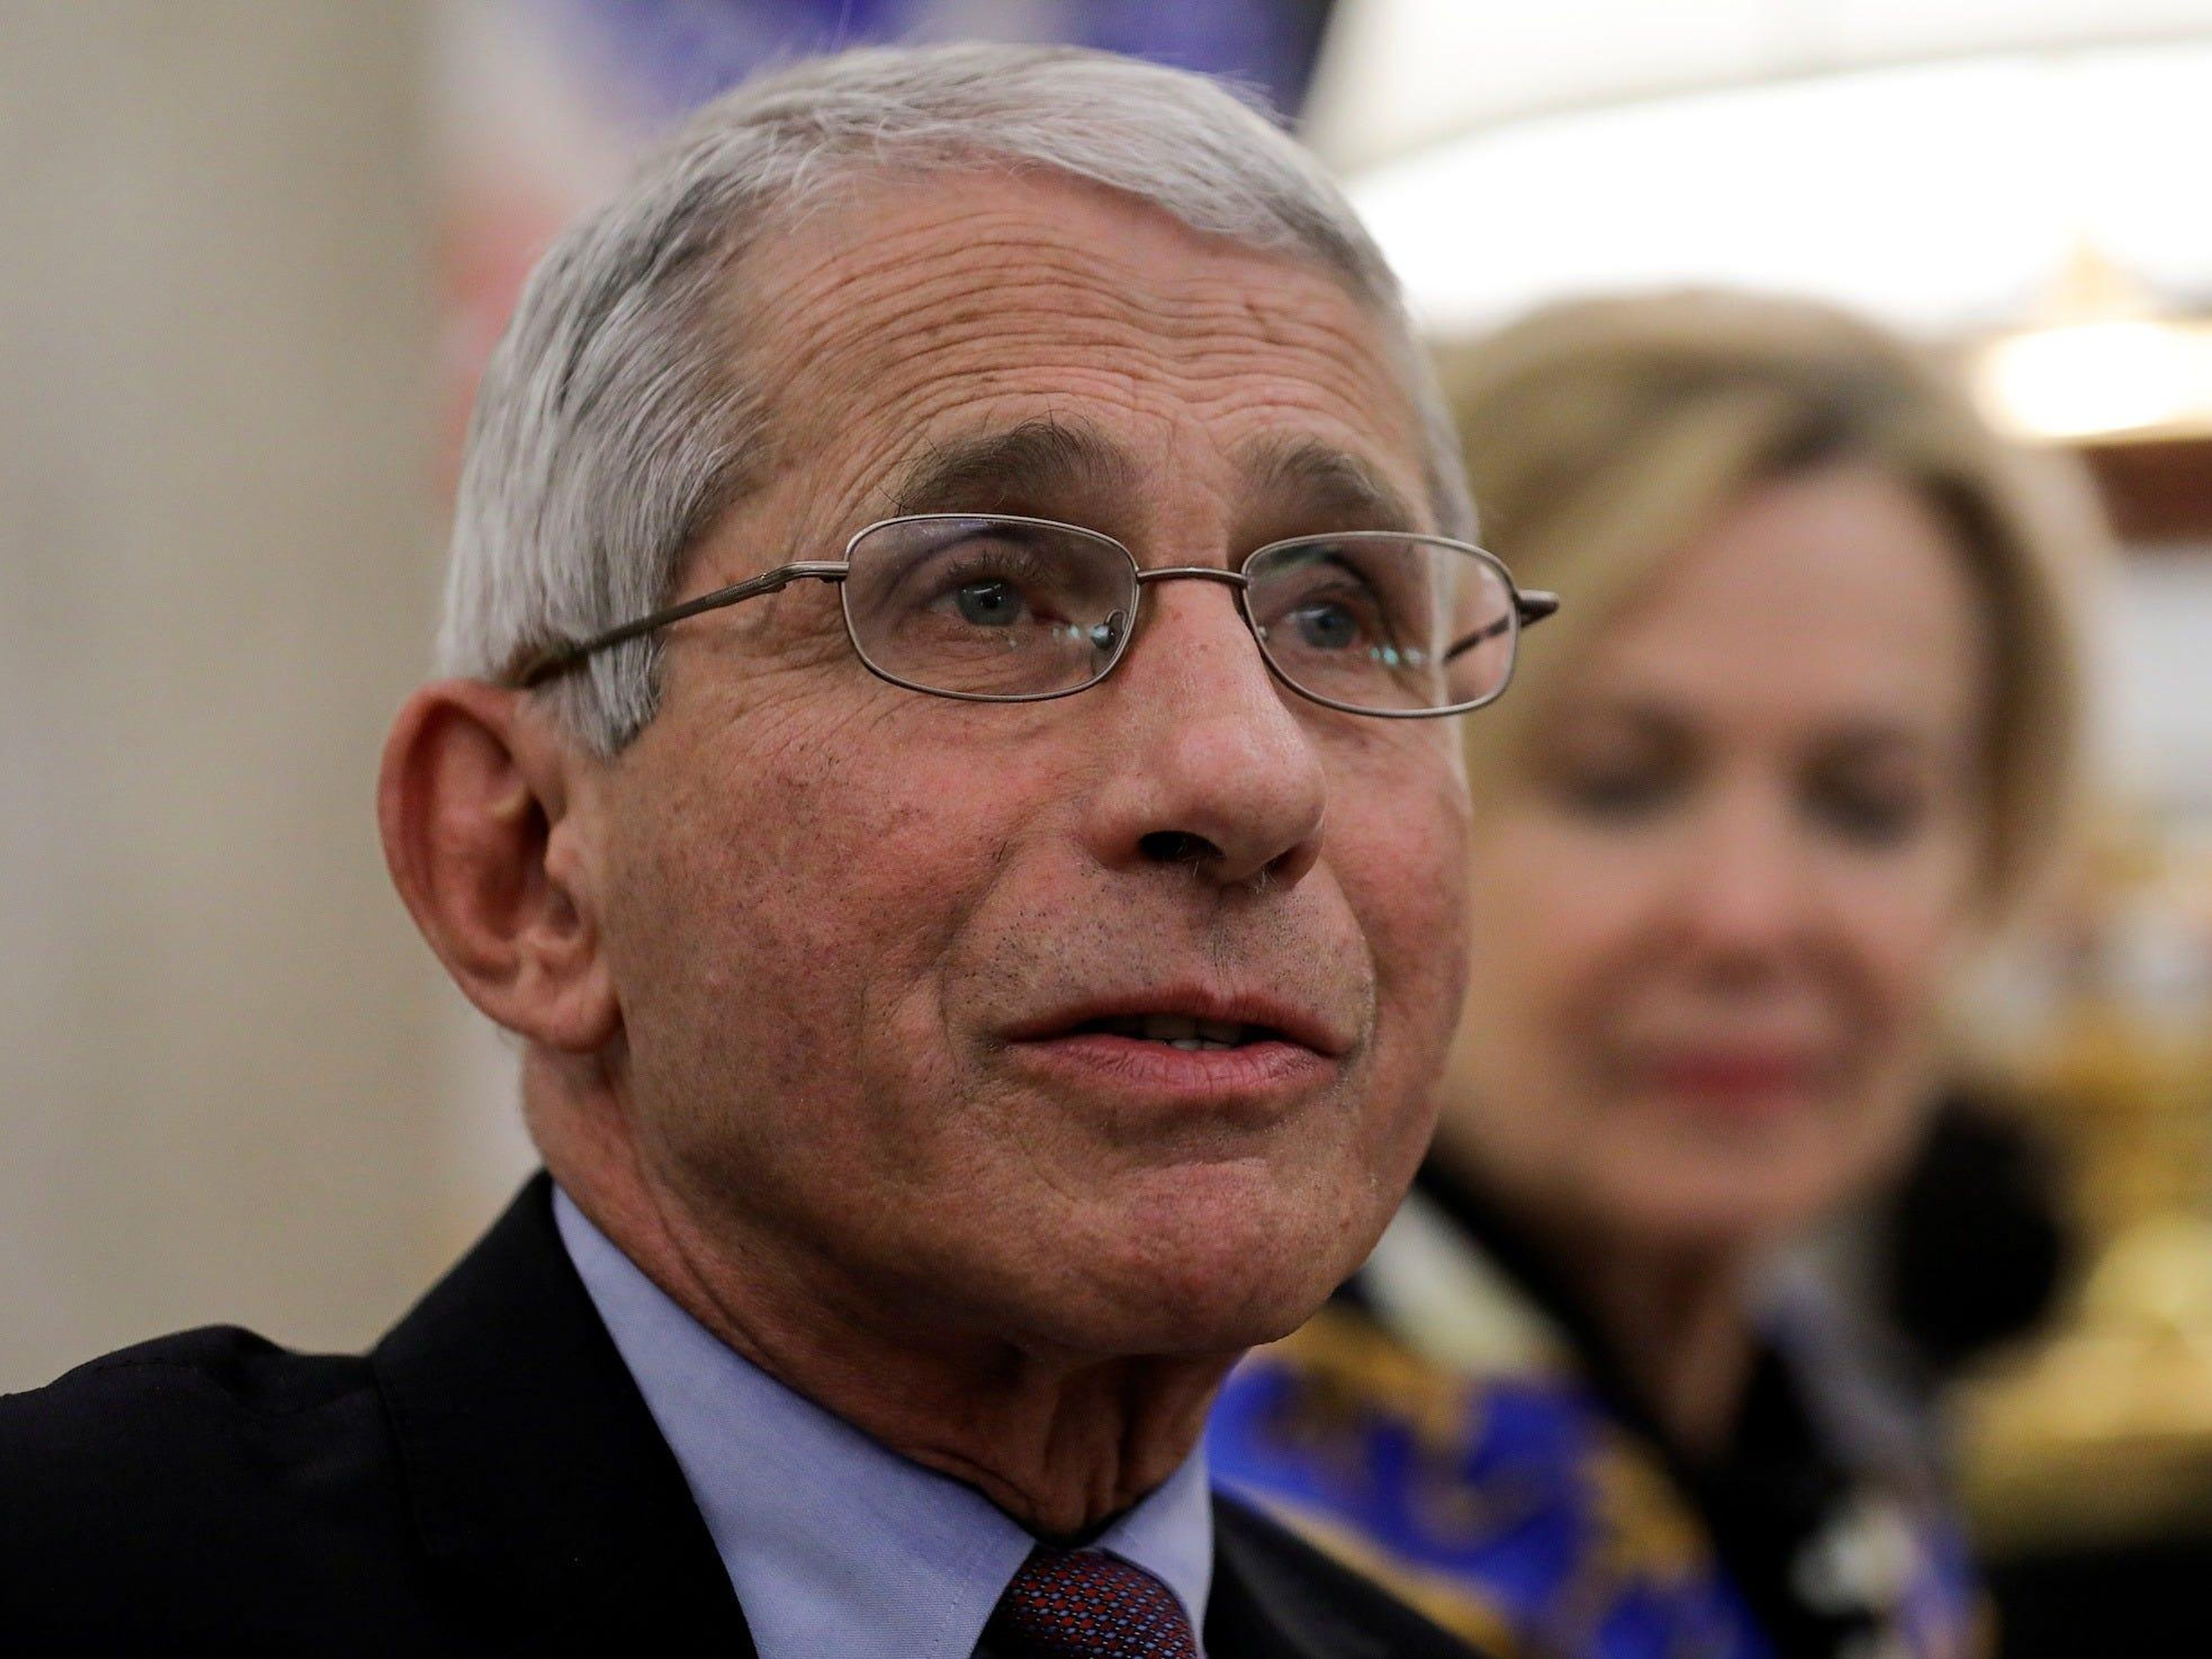 Dr. Anthony Fauci, director of the National Institute of Allergy and Infectious Diseases, speaks during a coronavirus-response meeting in the Oval Office at the White House, April 29, 2020.